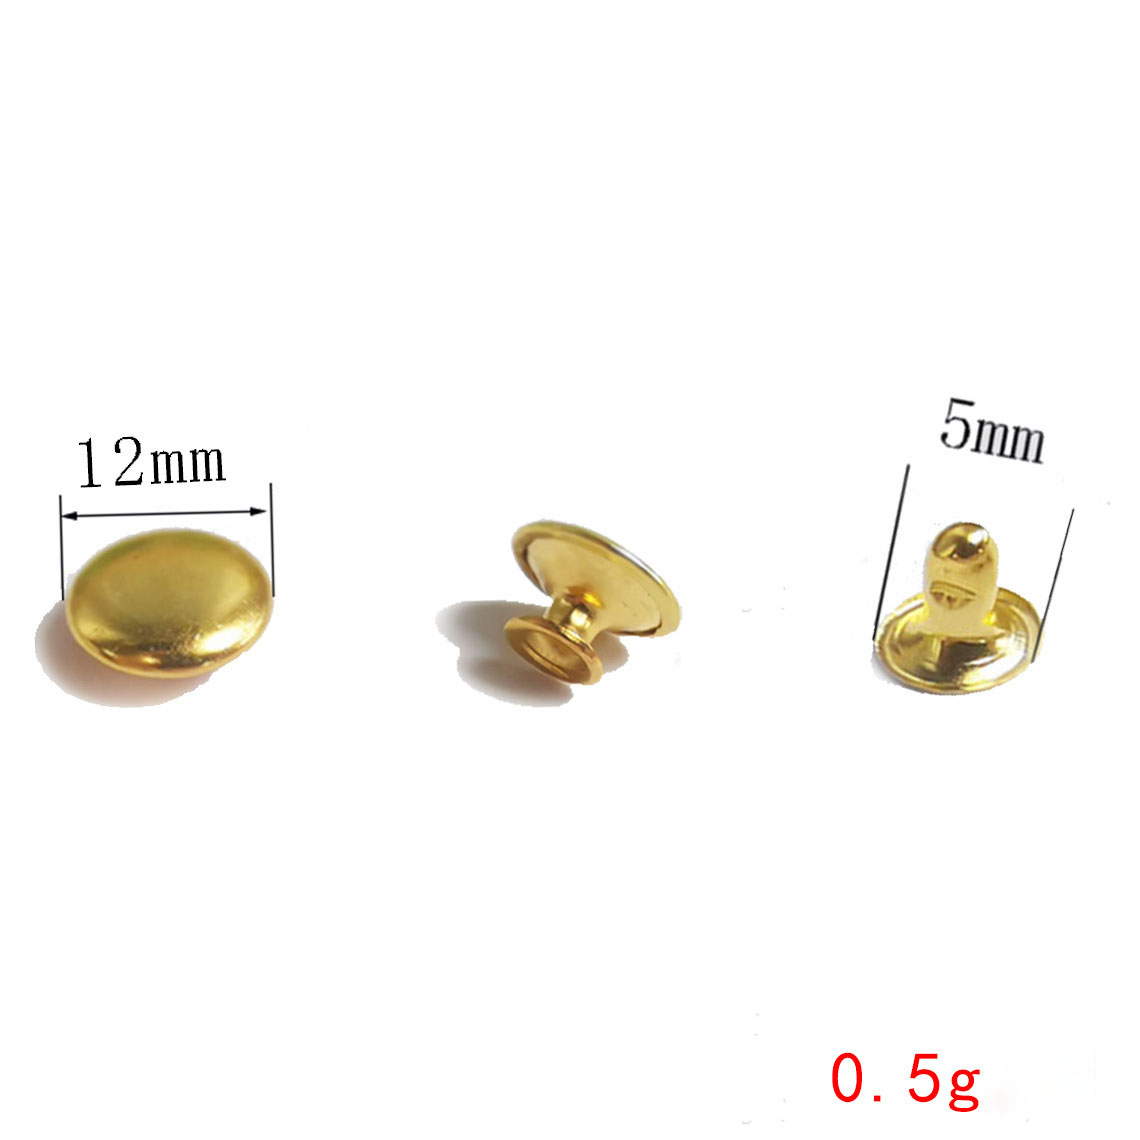 35:12mm gold